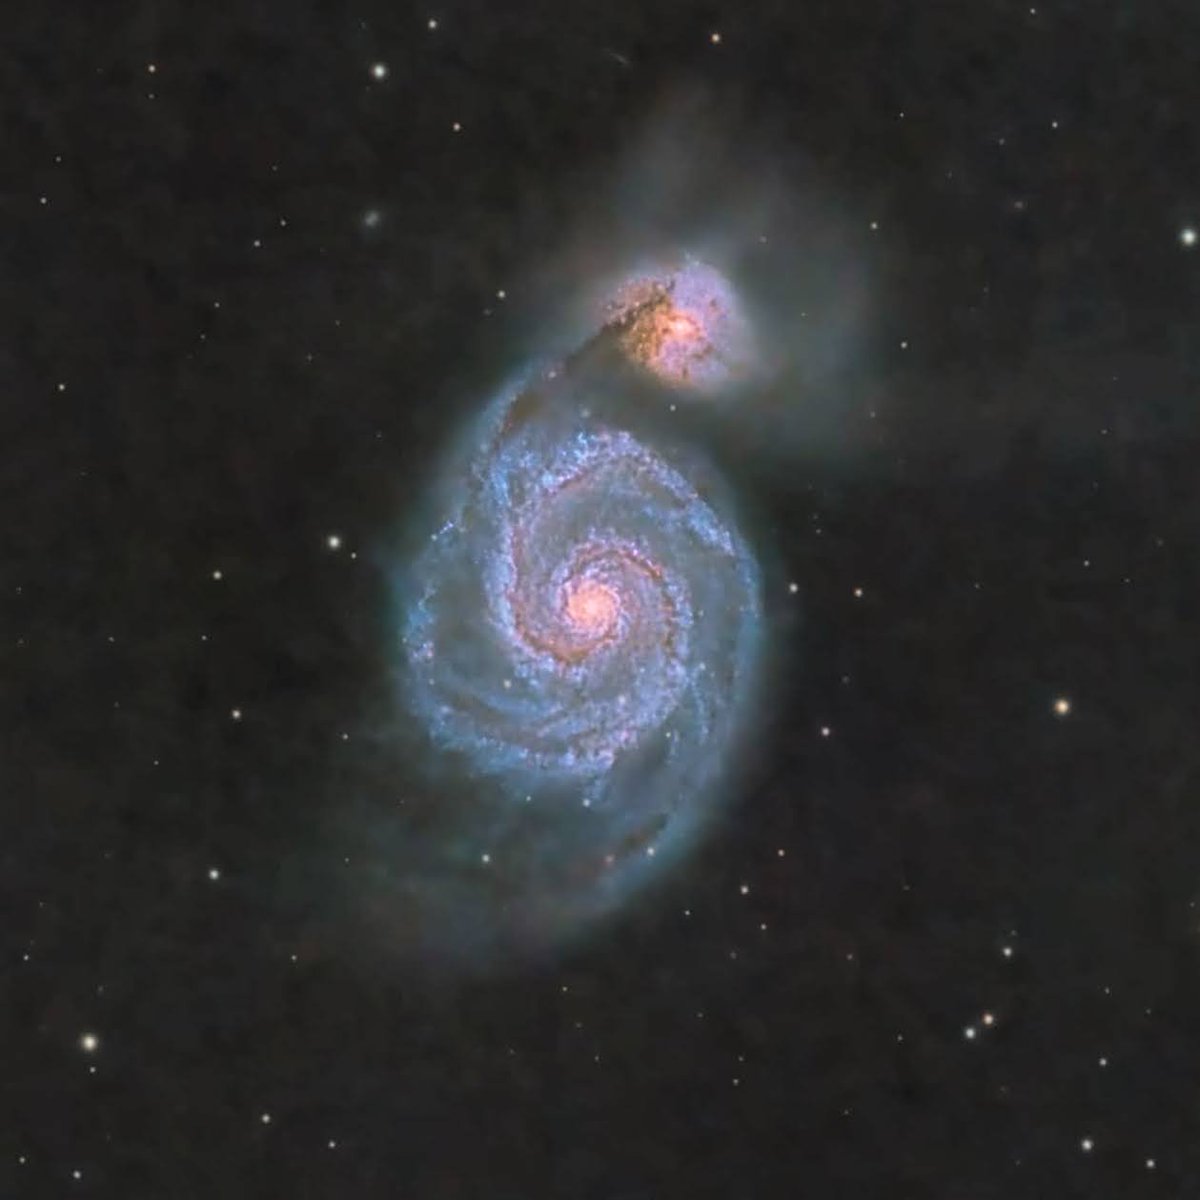 M51 captured from my back garden in #Devon over the weekend.  Reprocessed to improve colours #astrophotography